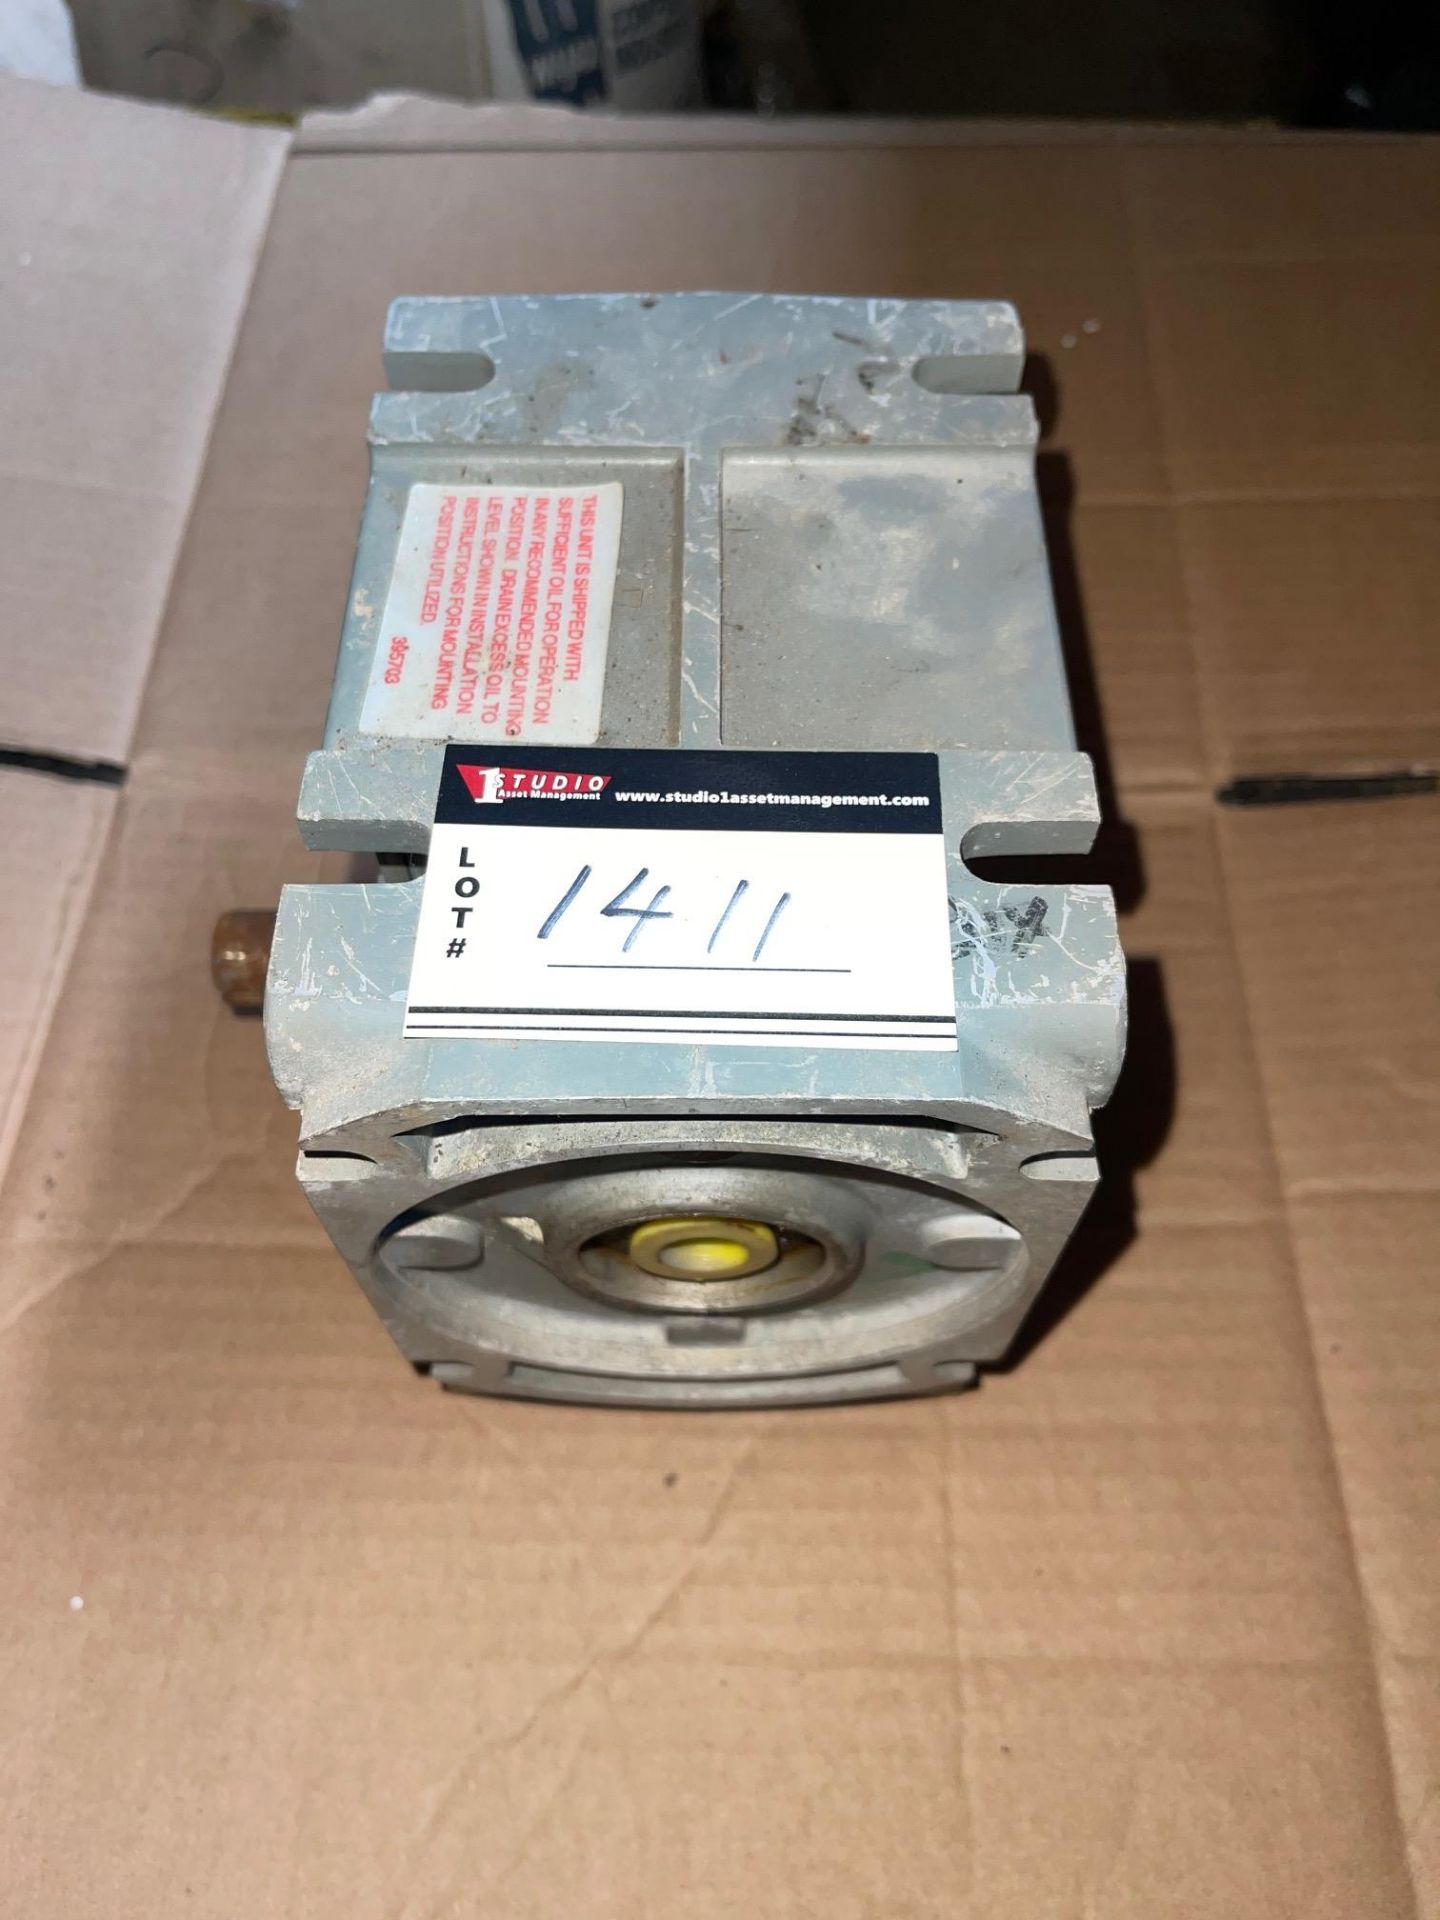 TOROUBE GEARBOX, 30:1 RATIO, INPUT 5/8", OUTPUT 7/8" - Image 5 of 5